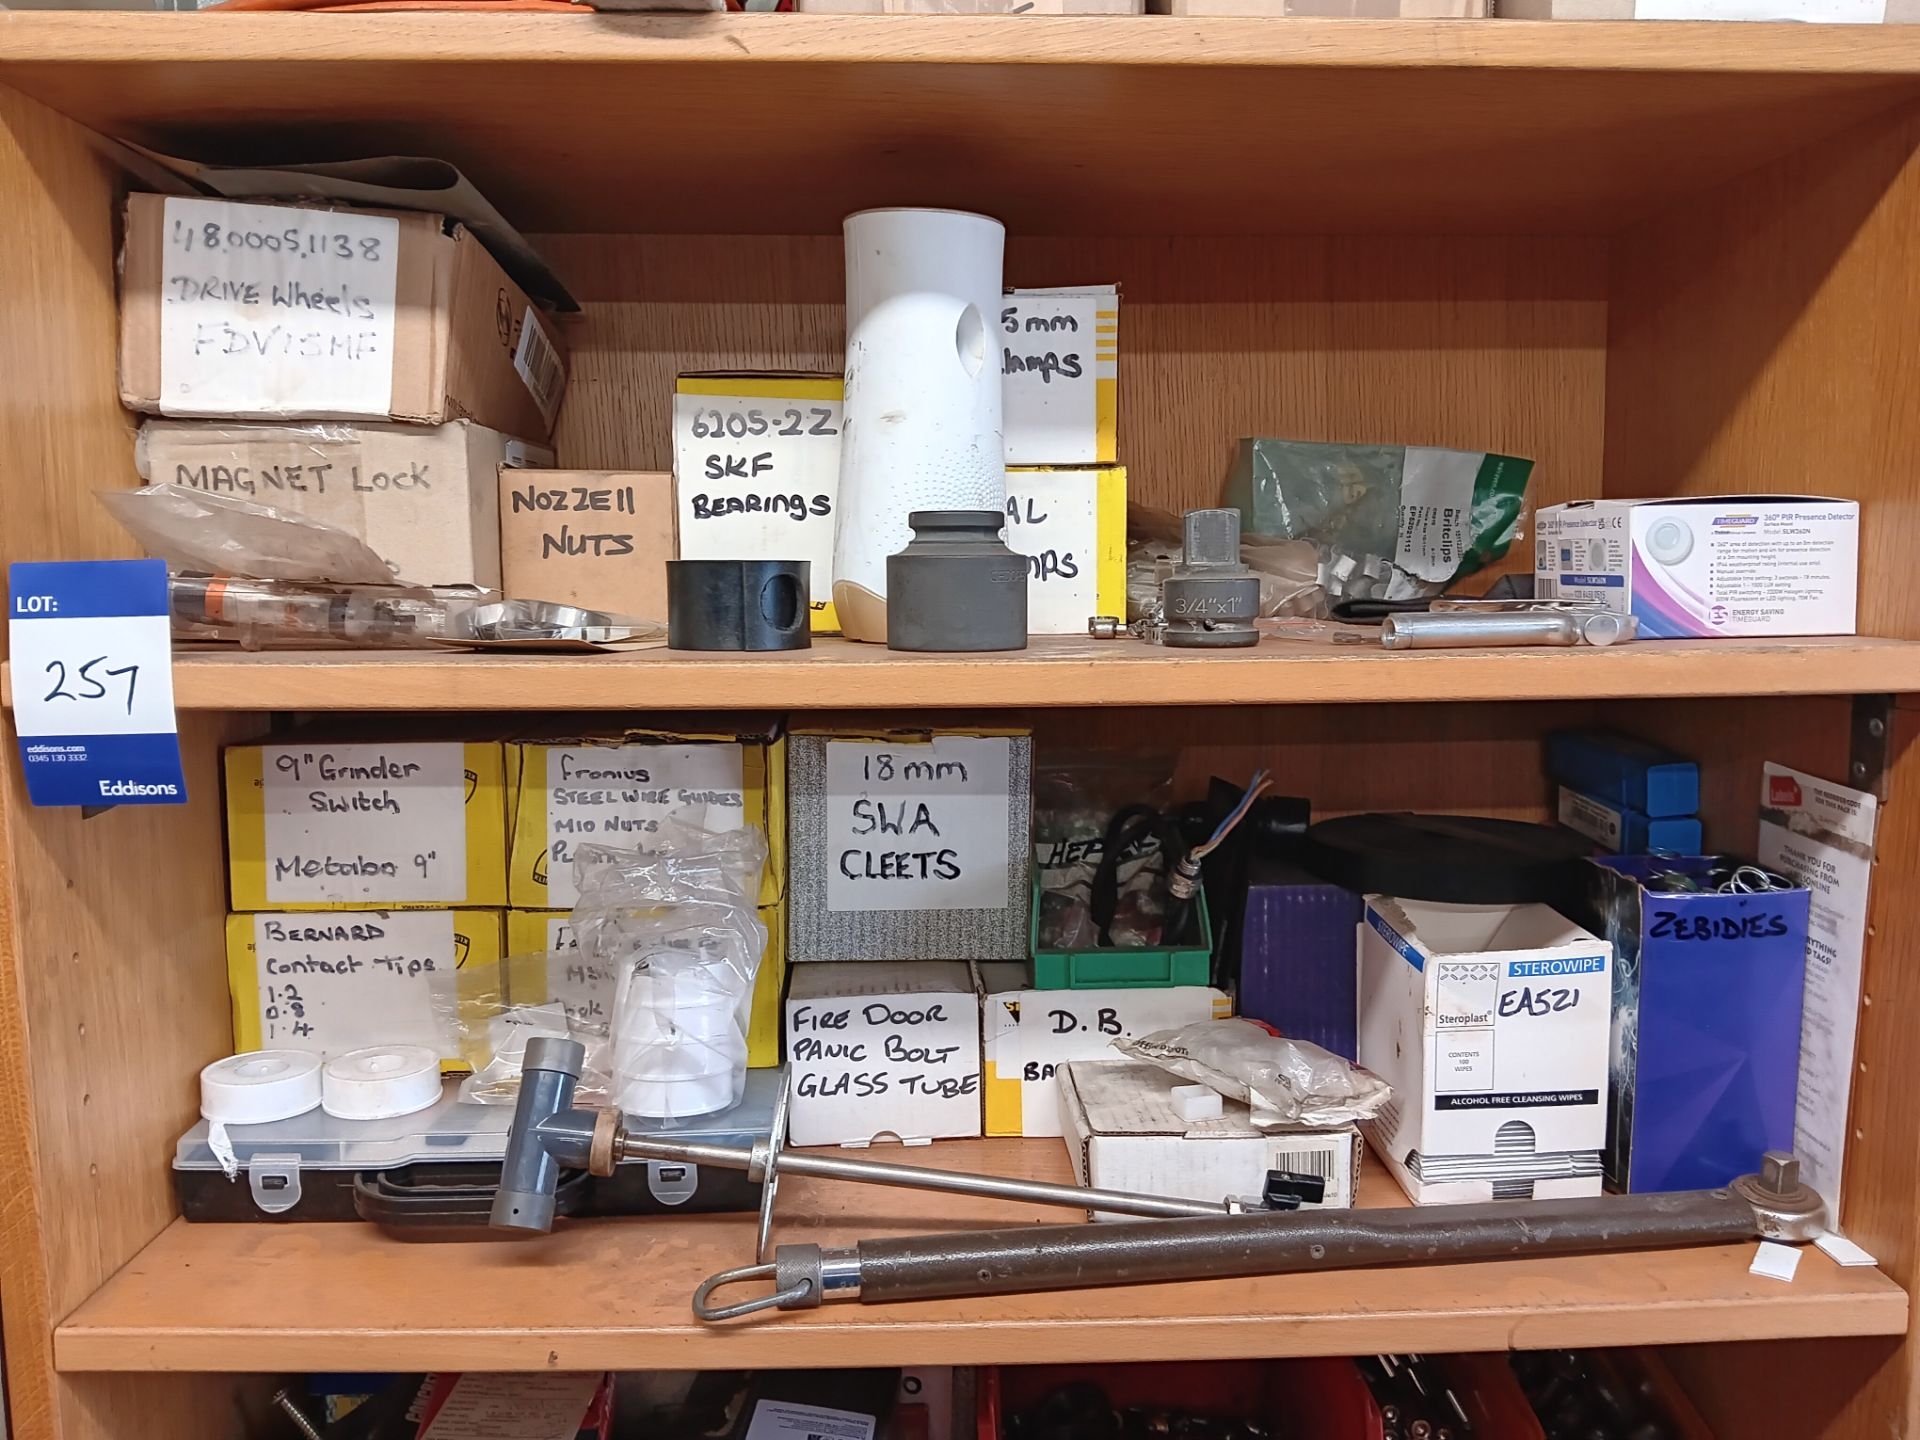 Contents of book shelf to include nuts, bolts, plates, screws etc. - Image 2 of 5